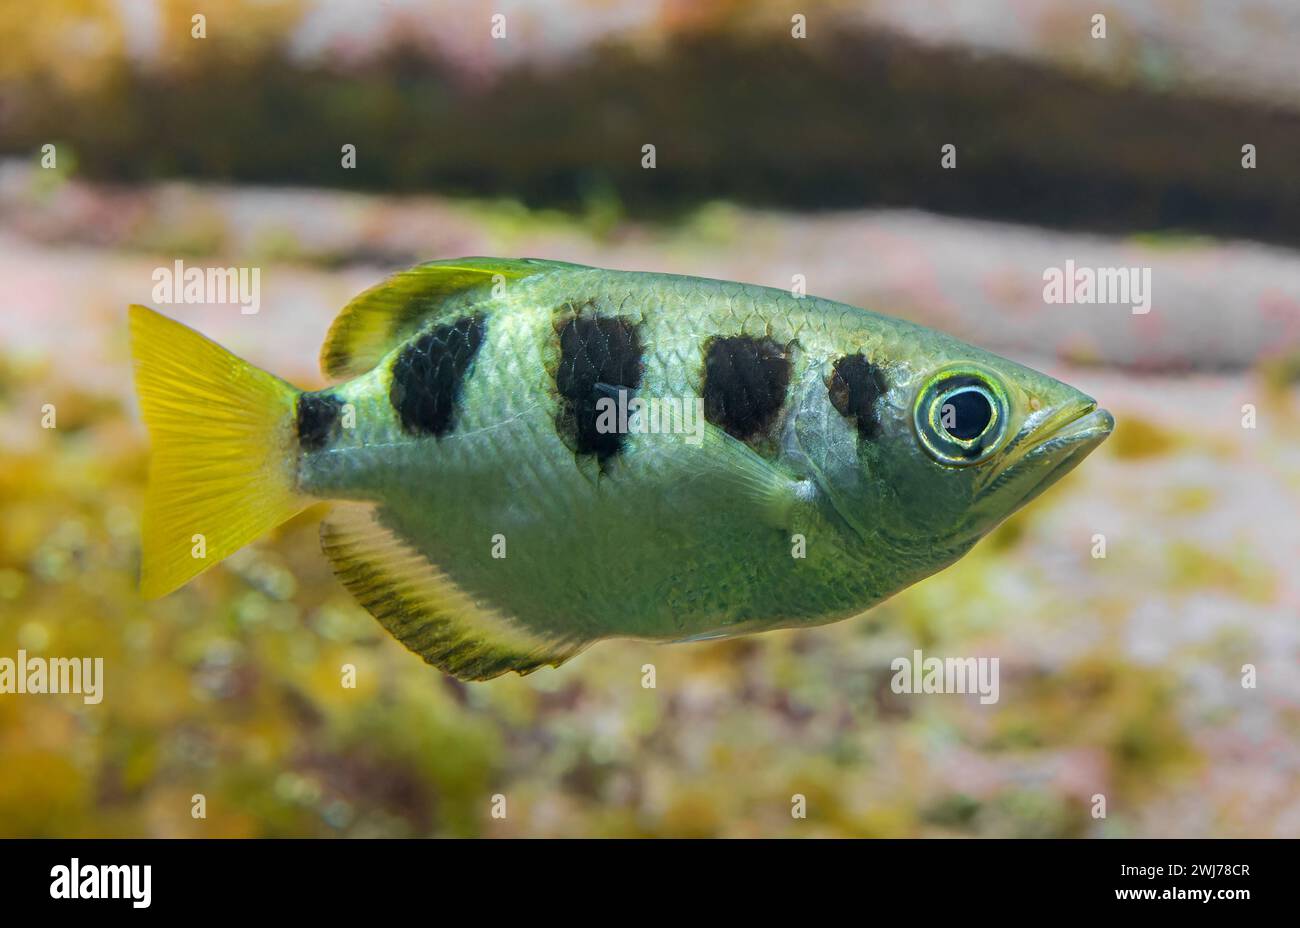 Side Close-up view of a Banded Archerfish (Toxotes jaculatrix) Stock Photo